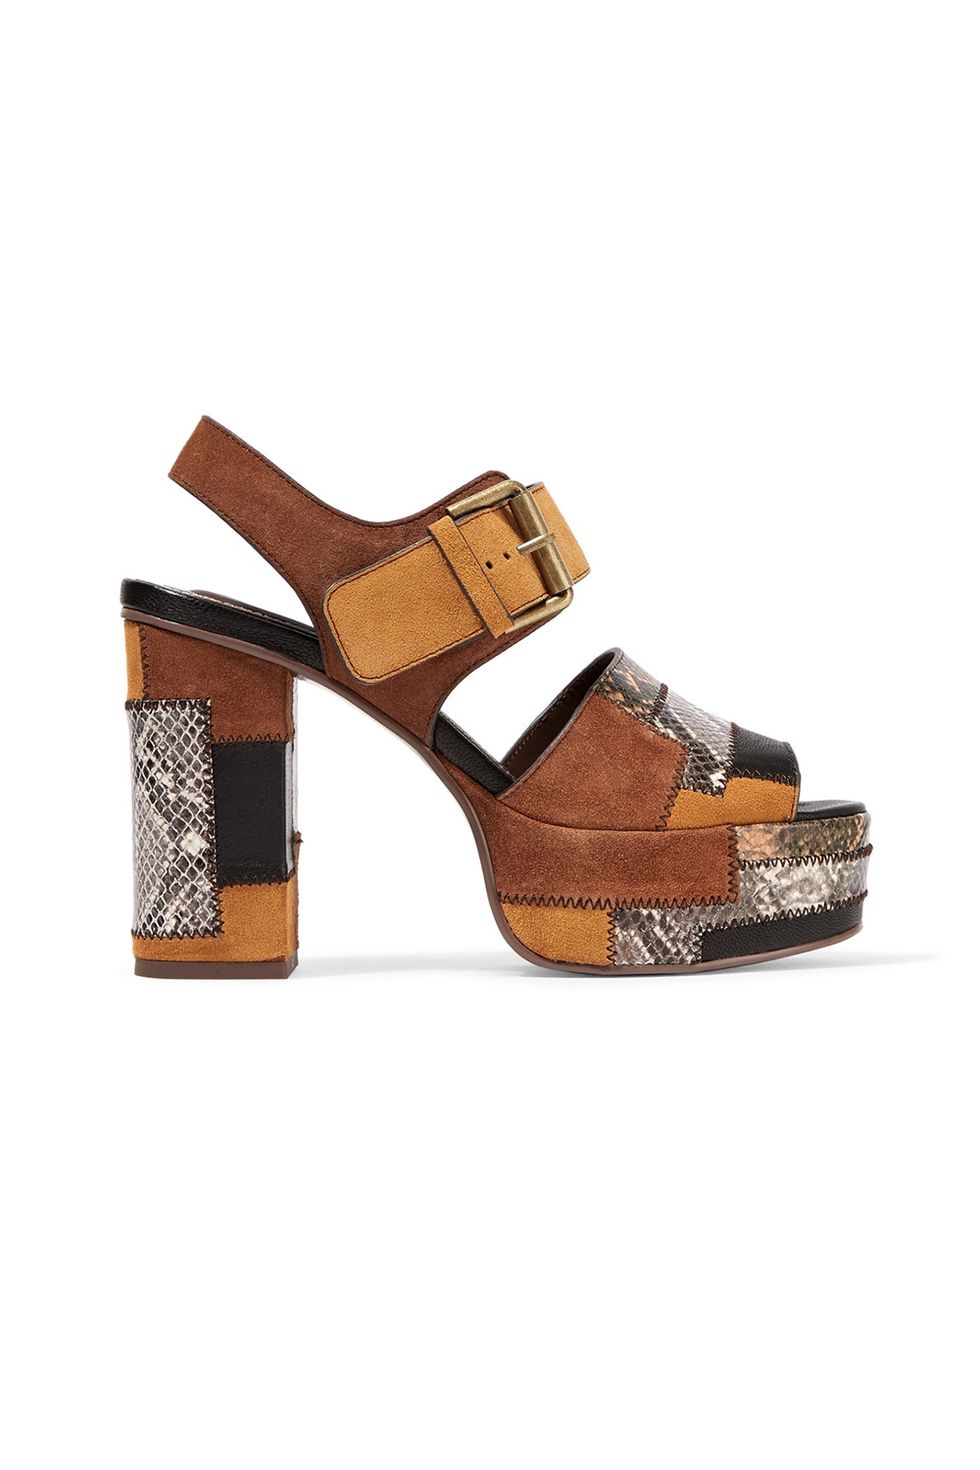 <p>These patchwork platforms are perfect with pretty much any outfit—from denim to your LBD.</p><p>See by Chloé Platforms, $365; <a href="https://www.net-a-porter.com/us/en/product/800525/see_by_chloe/patchwork-snake-effect-leather-and-suede-platform-sandals" target="_blank" data-tracking-id="recirc-text-link">net-a-porter.com</a></p>